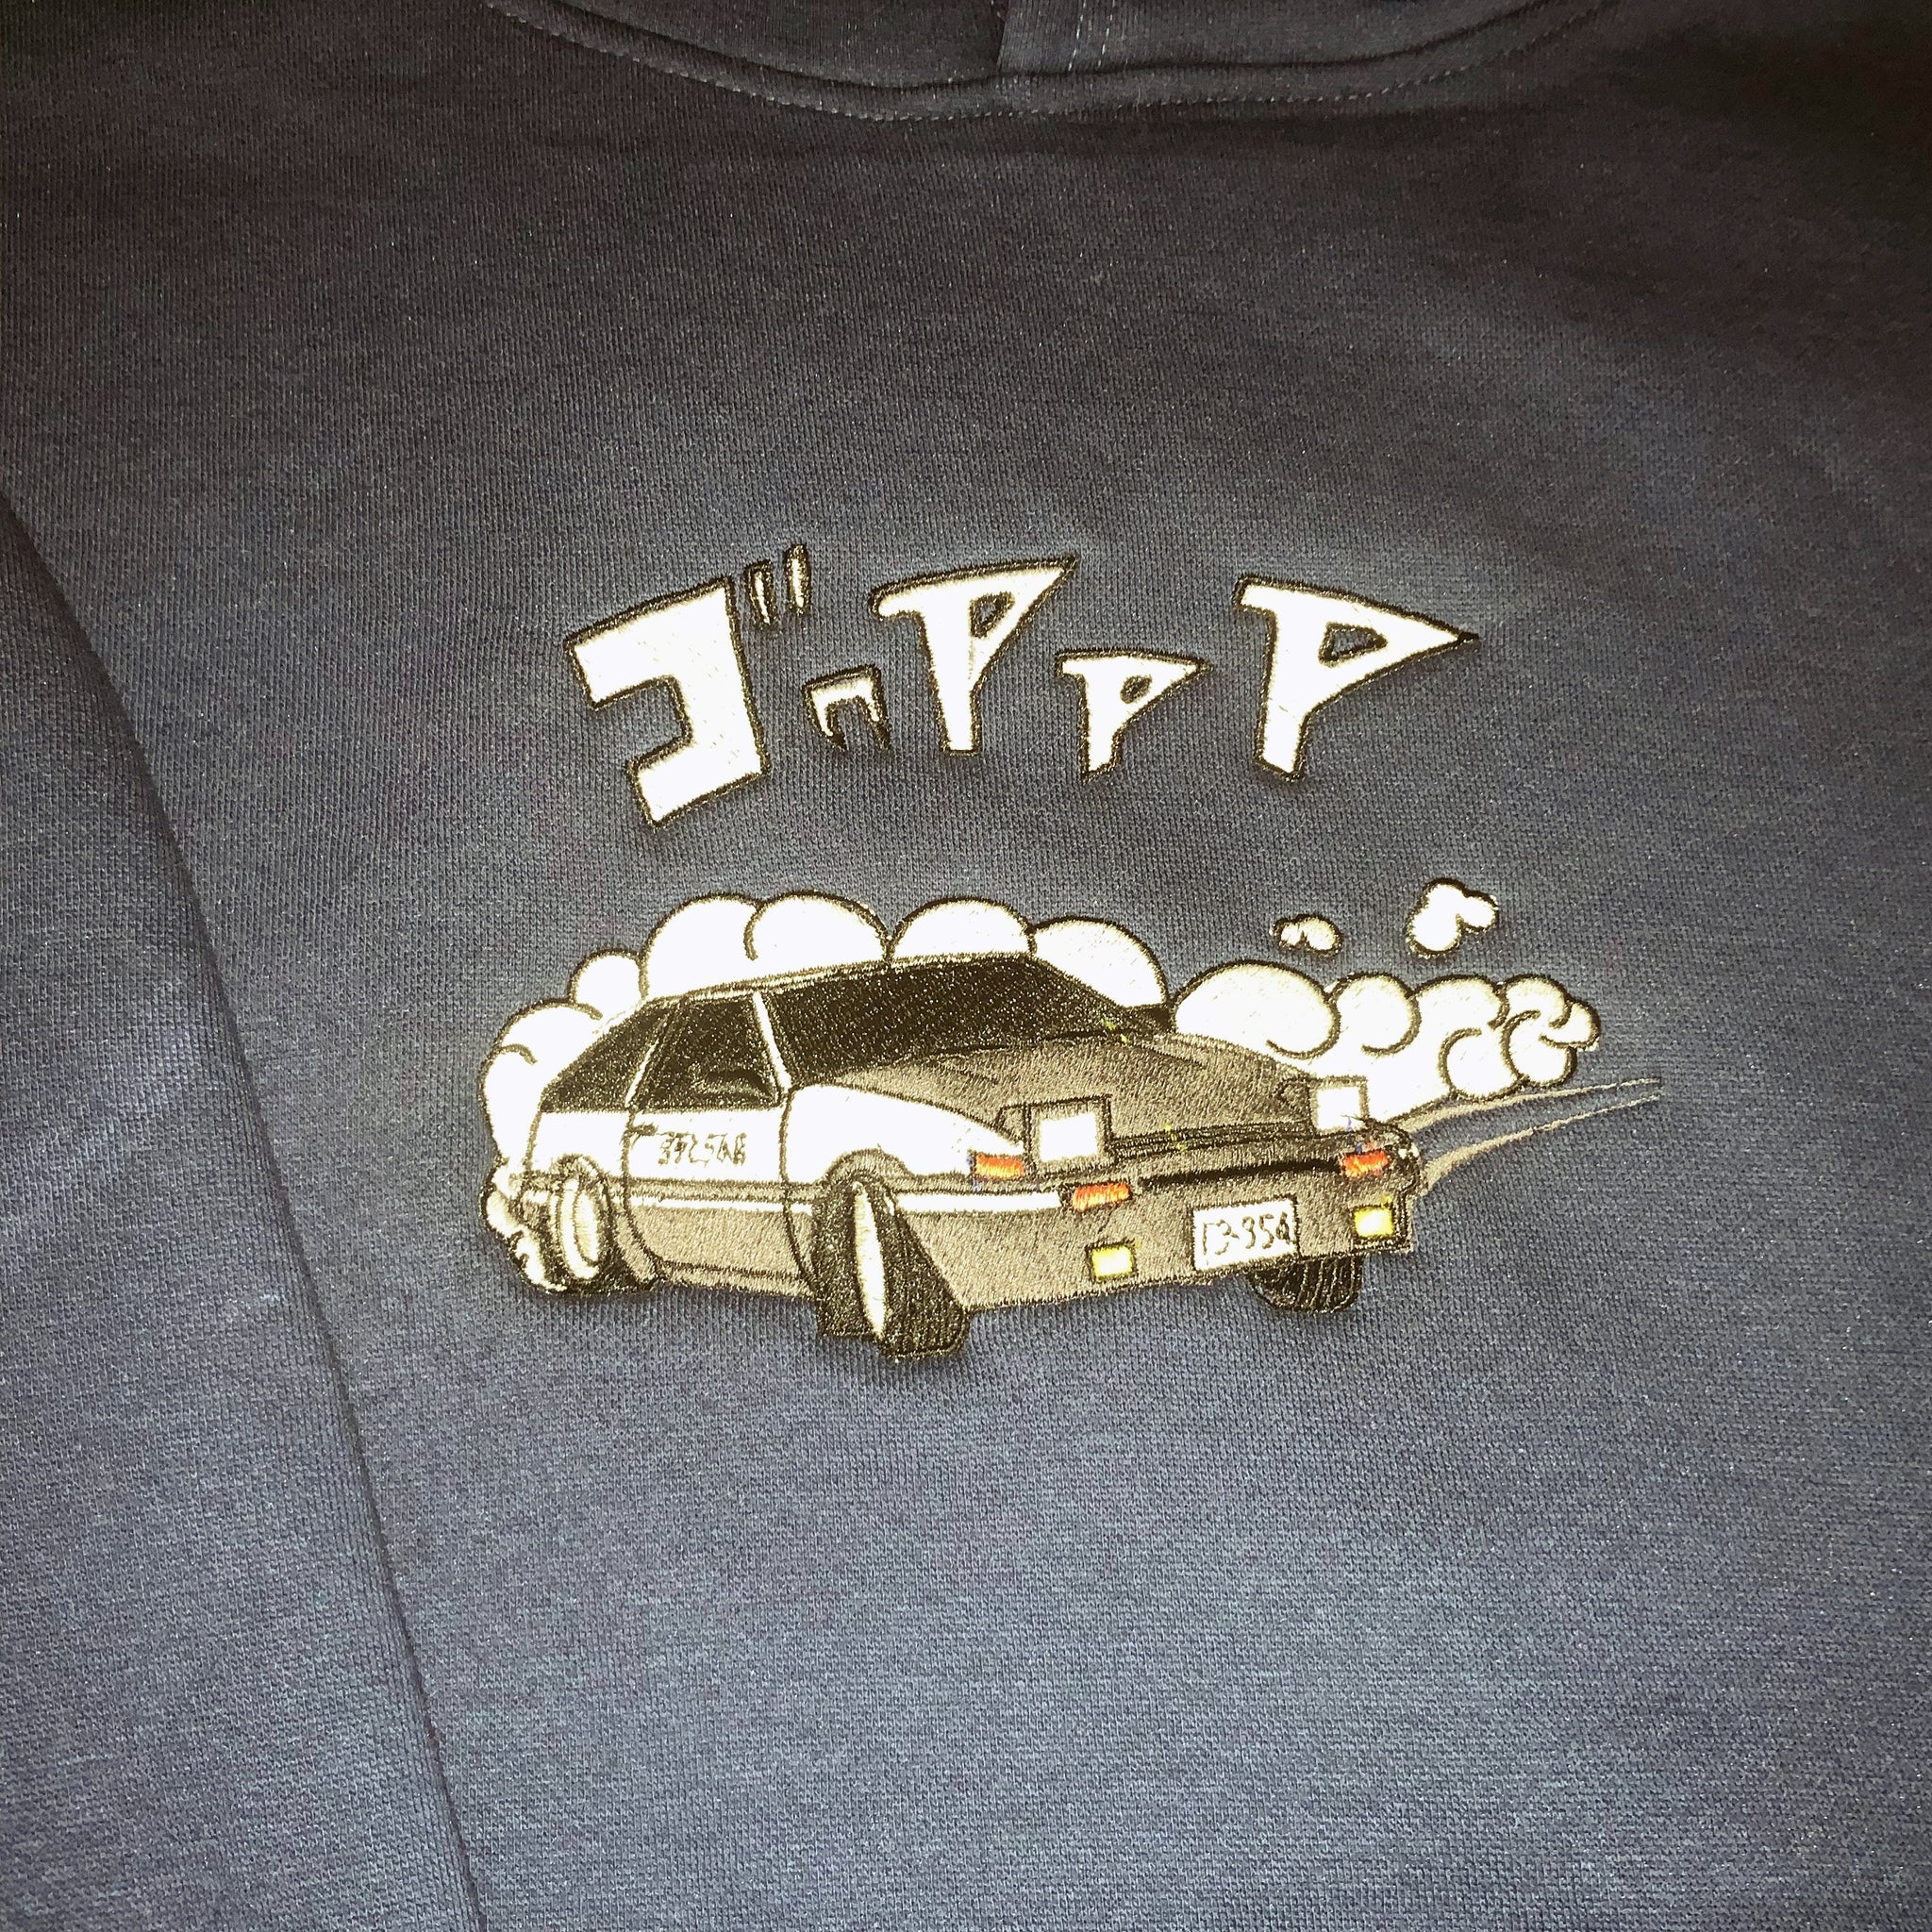 LIMITED INITIAL D STREET RACING ISH EMBROIDERED ANIME HOODIE